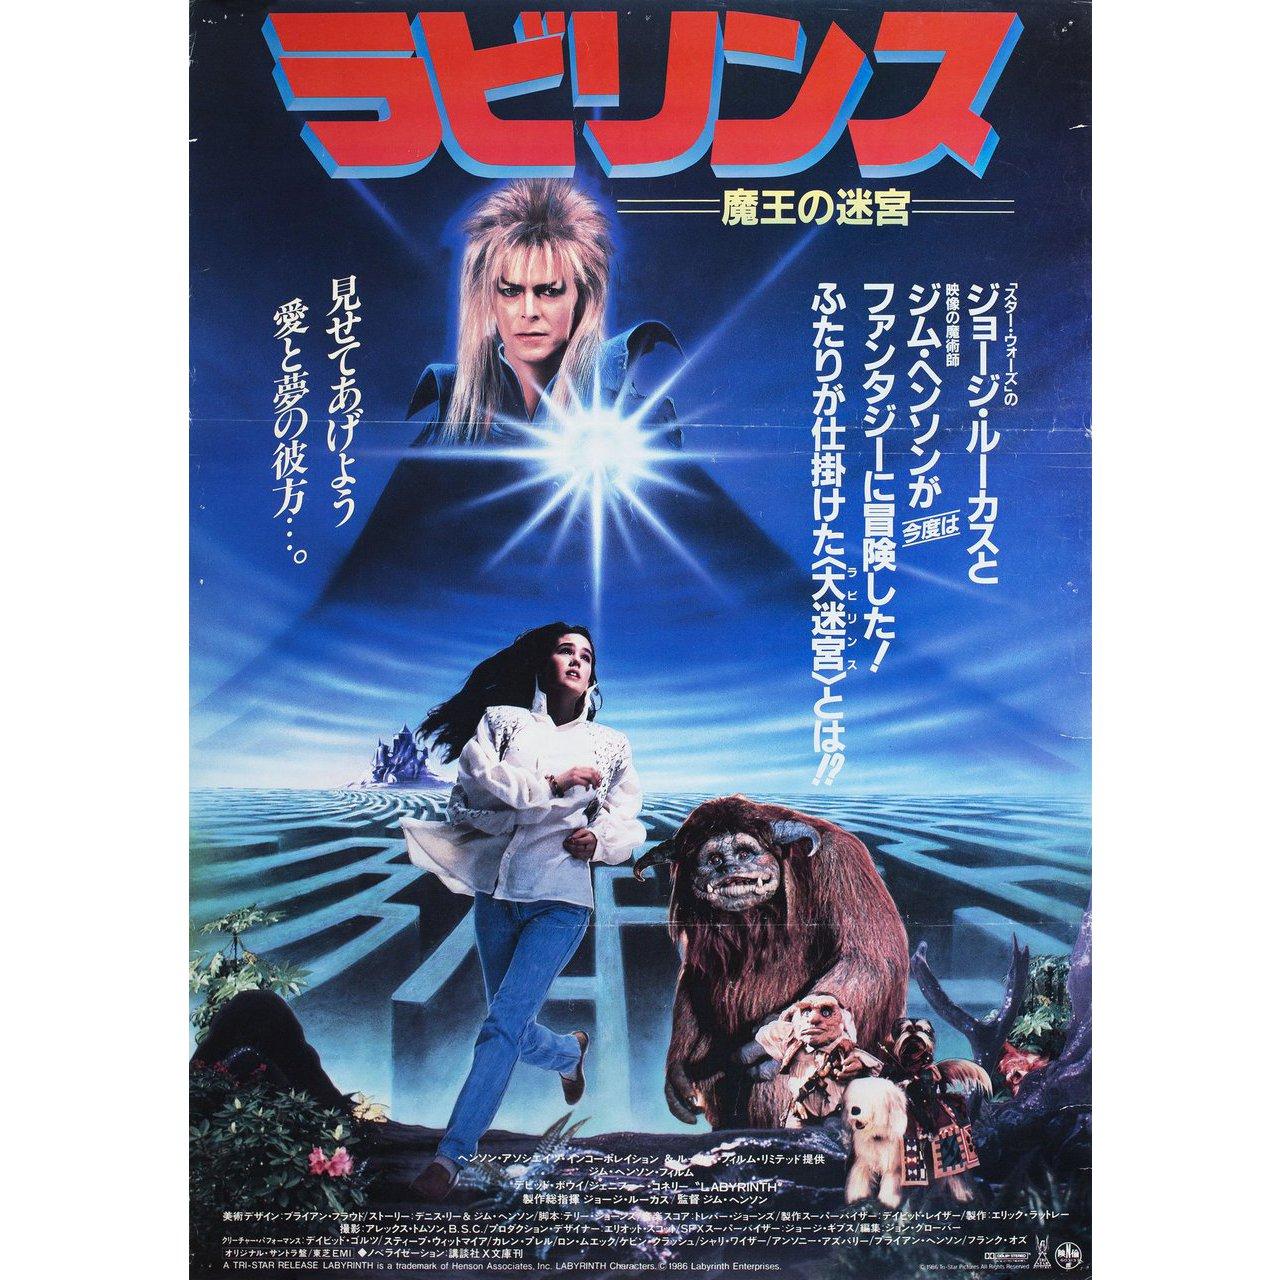 Original 1986 Japanese B2 poster for the film Labyrinth directed by Jim Henson with David Bowie / Jennifer Connelly / Toby Froud / Shelley Thompson. Very good condition, folded. Many original posters were issued folded or were subsequently folded.